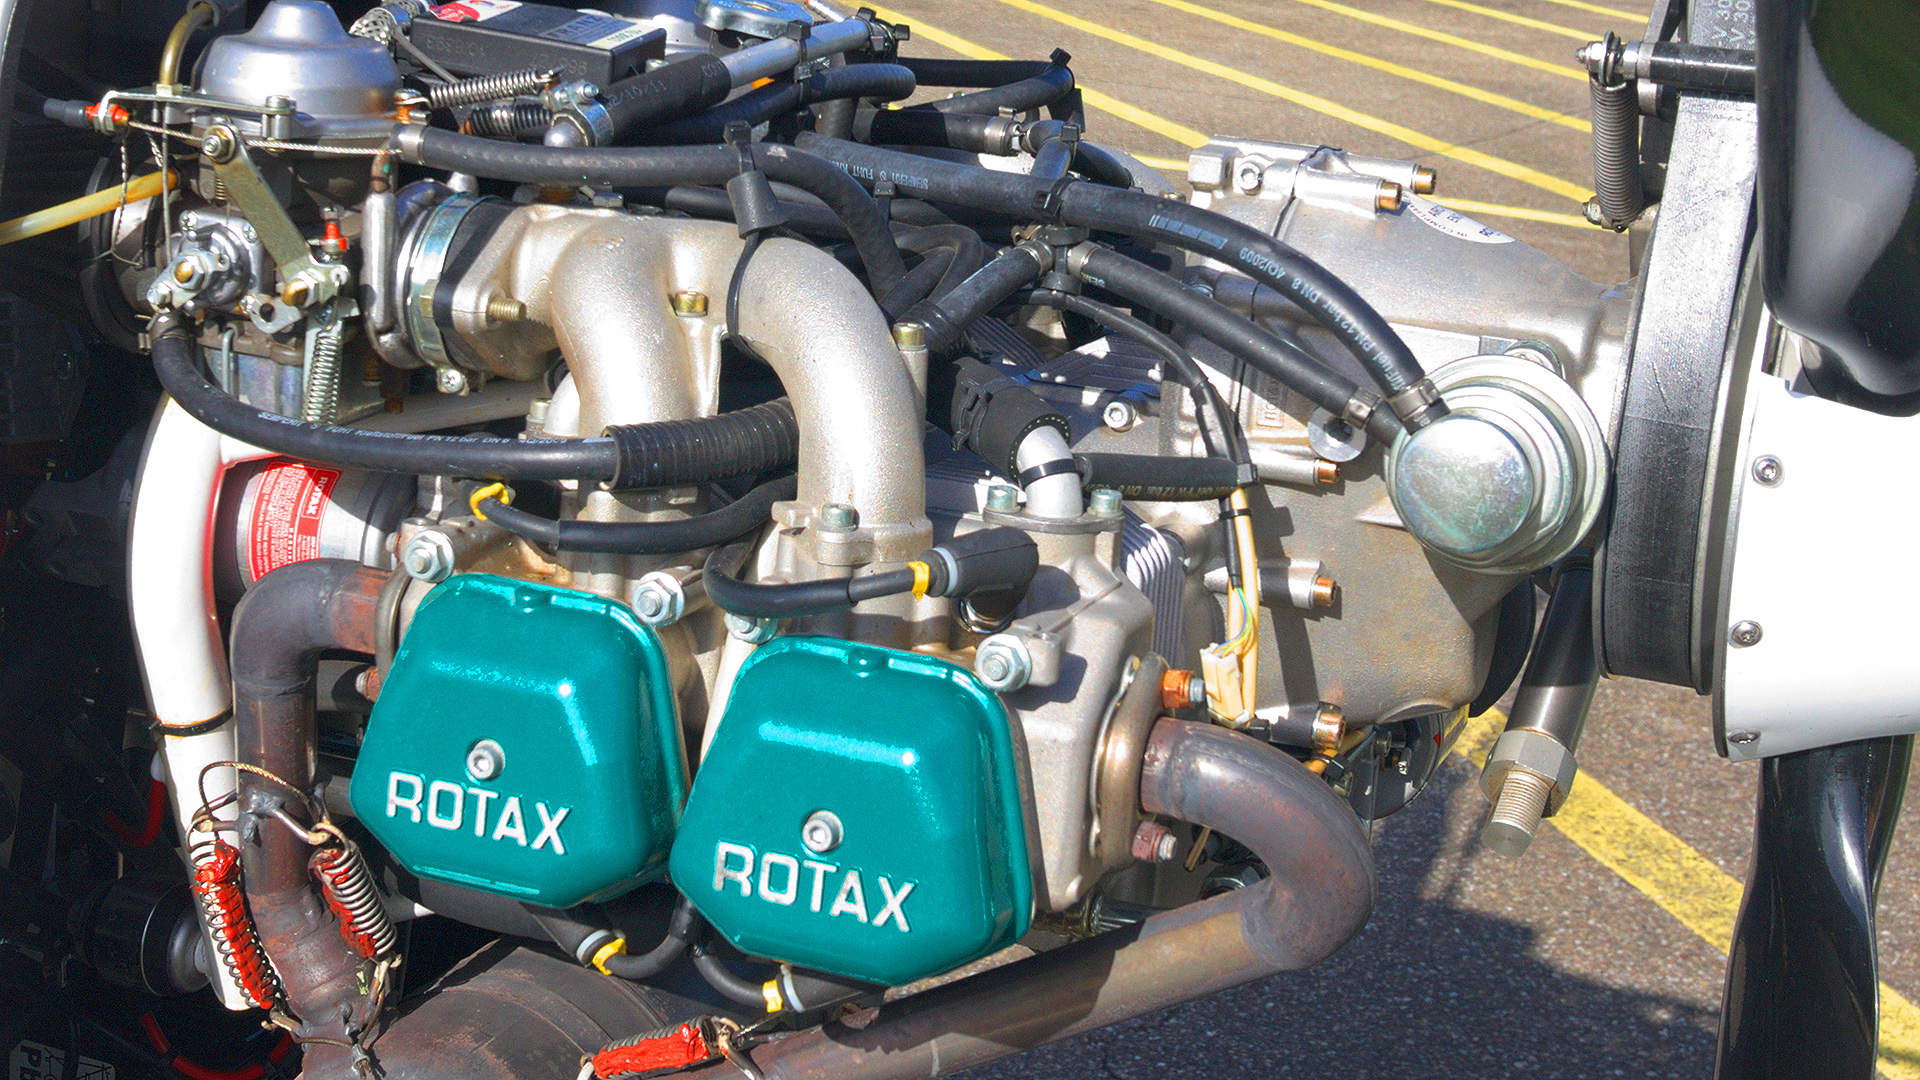 Same Type Of Rotax Engines Used In Drones Targeted In Bizarre Theft Wave (Updated)